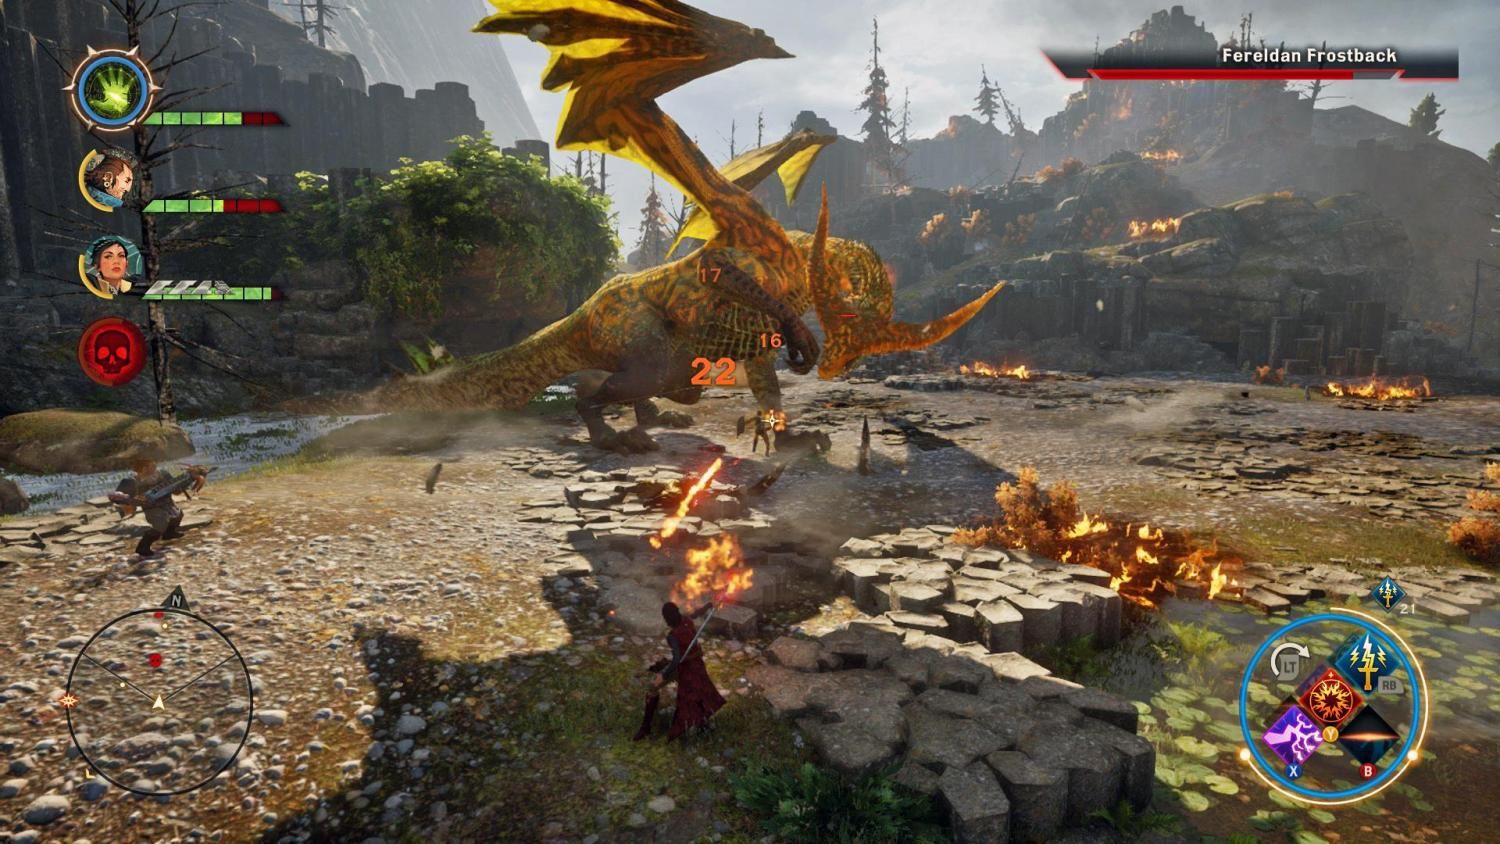 A player fights a Fereldan Frostback high dragon with their party in Dragon Age: Inquisition